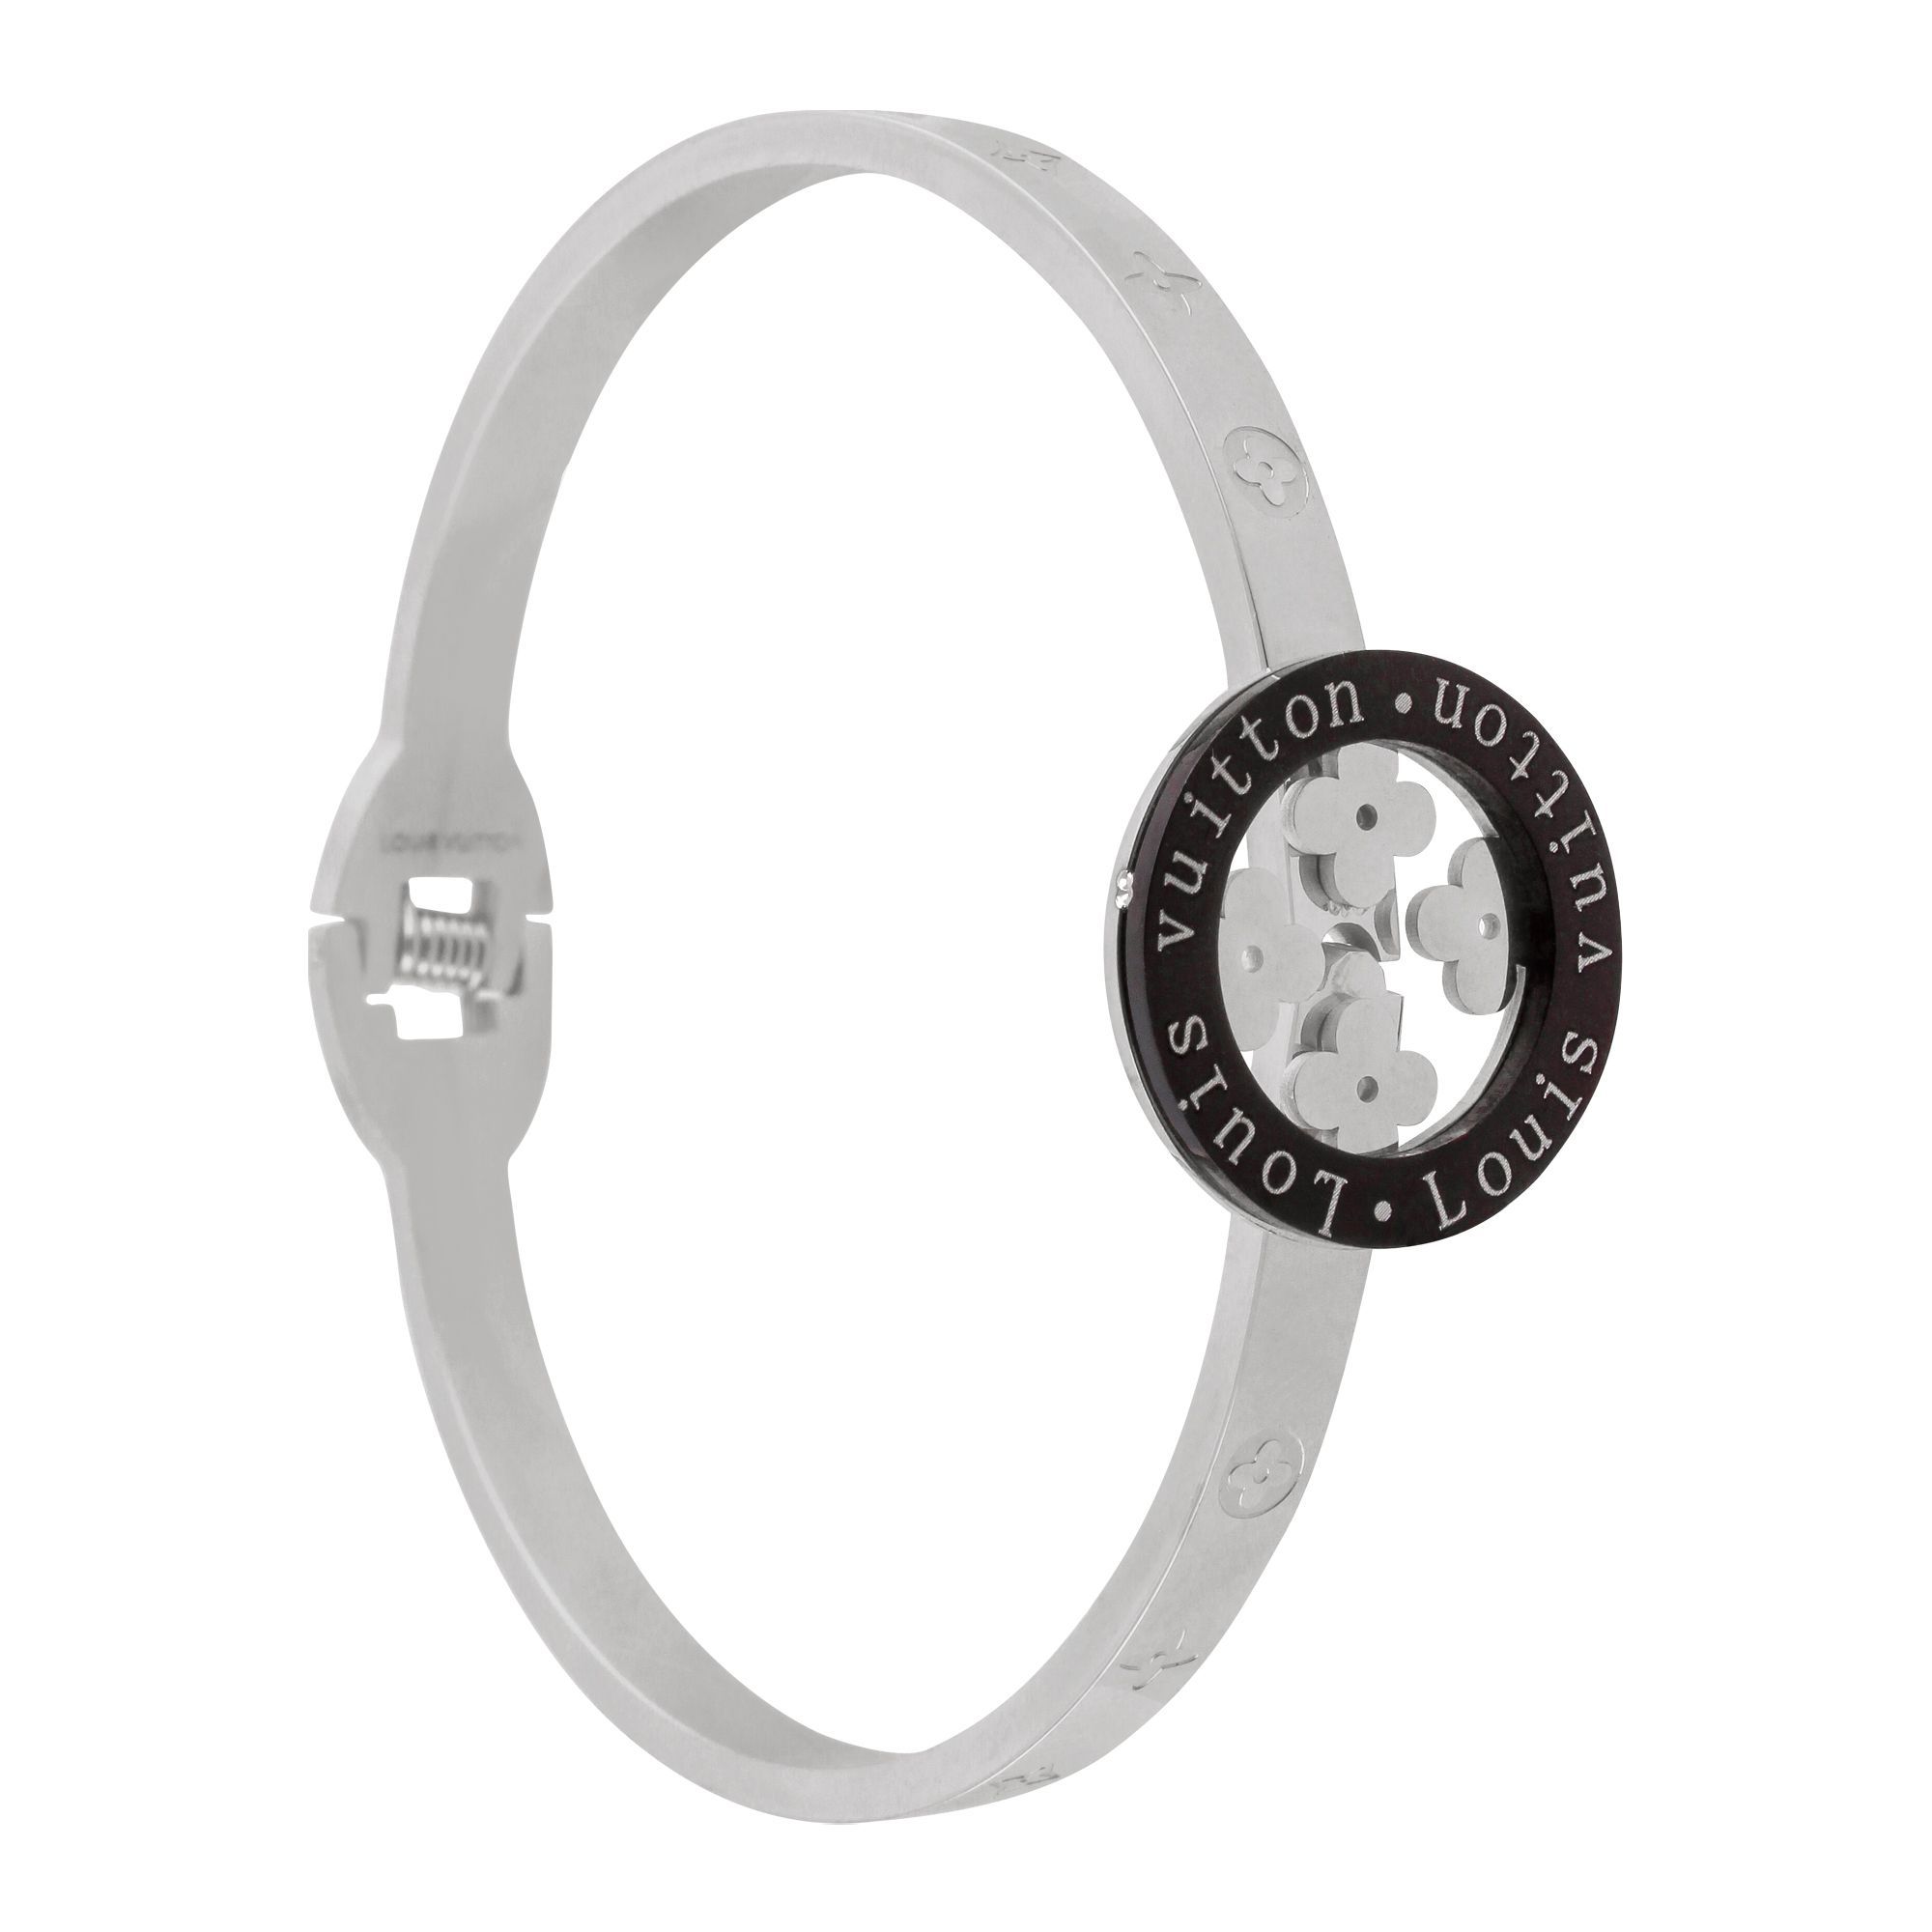 Purchase LV Style Girls Bracelet, Silver, NS-0165 Online at Best Price in Pakistan - www.bagssaleusa.com